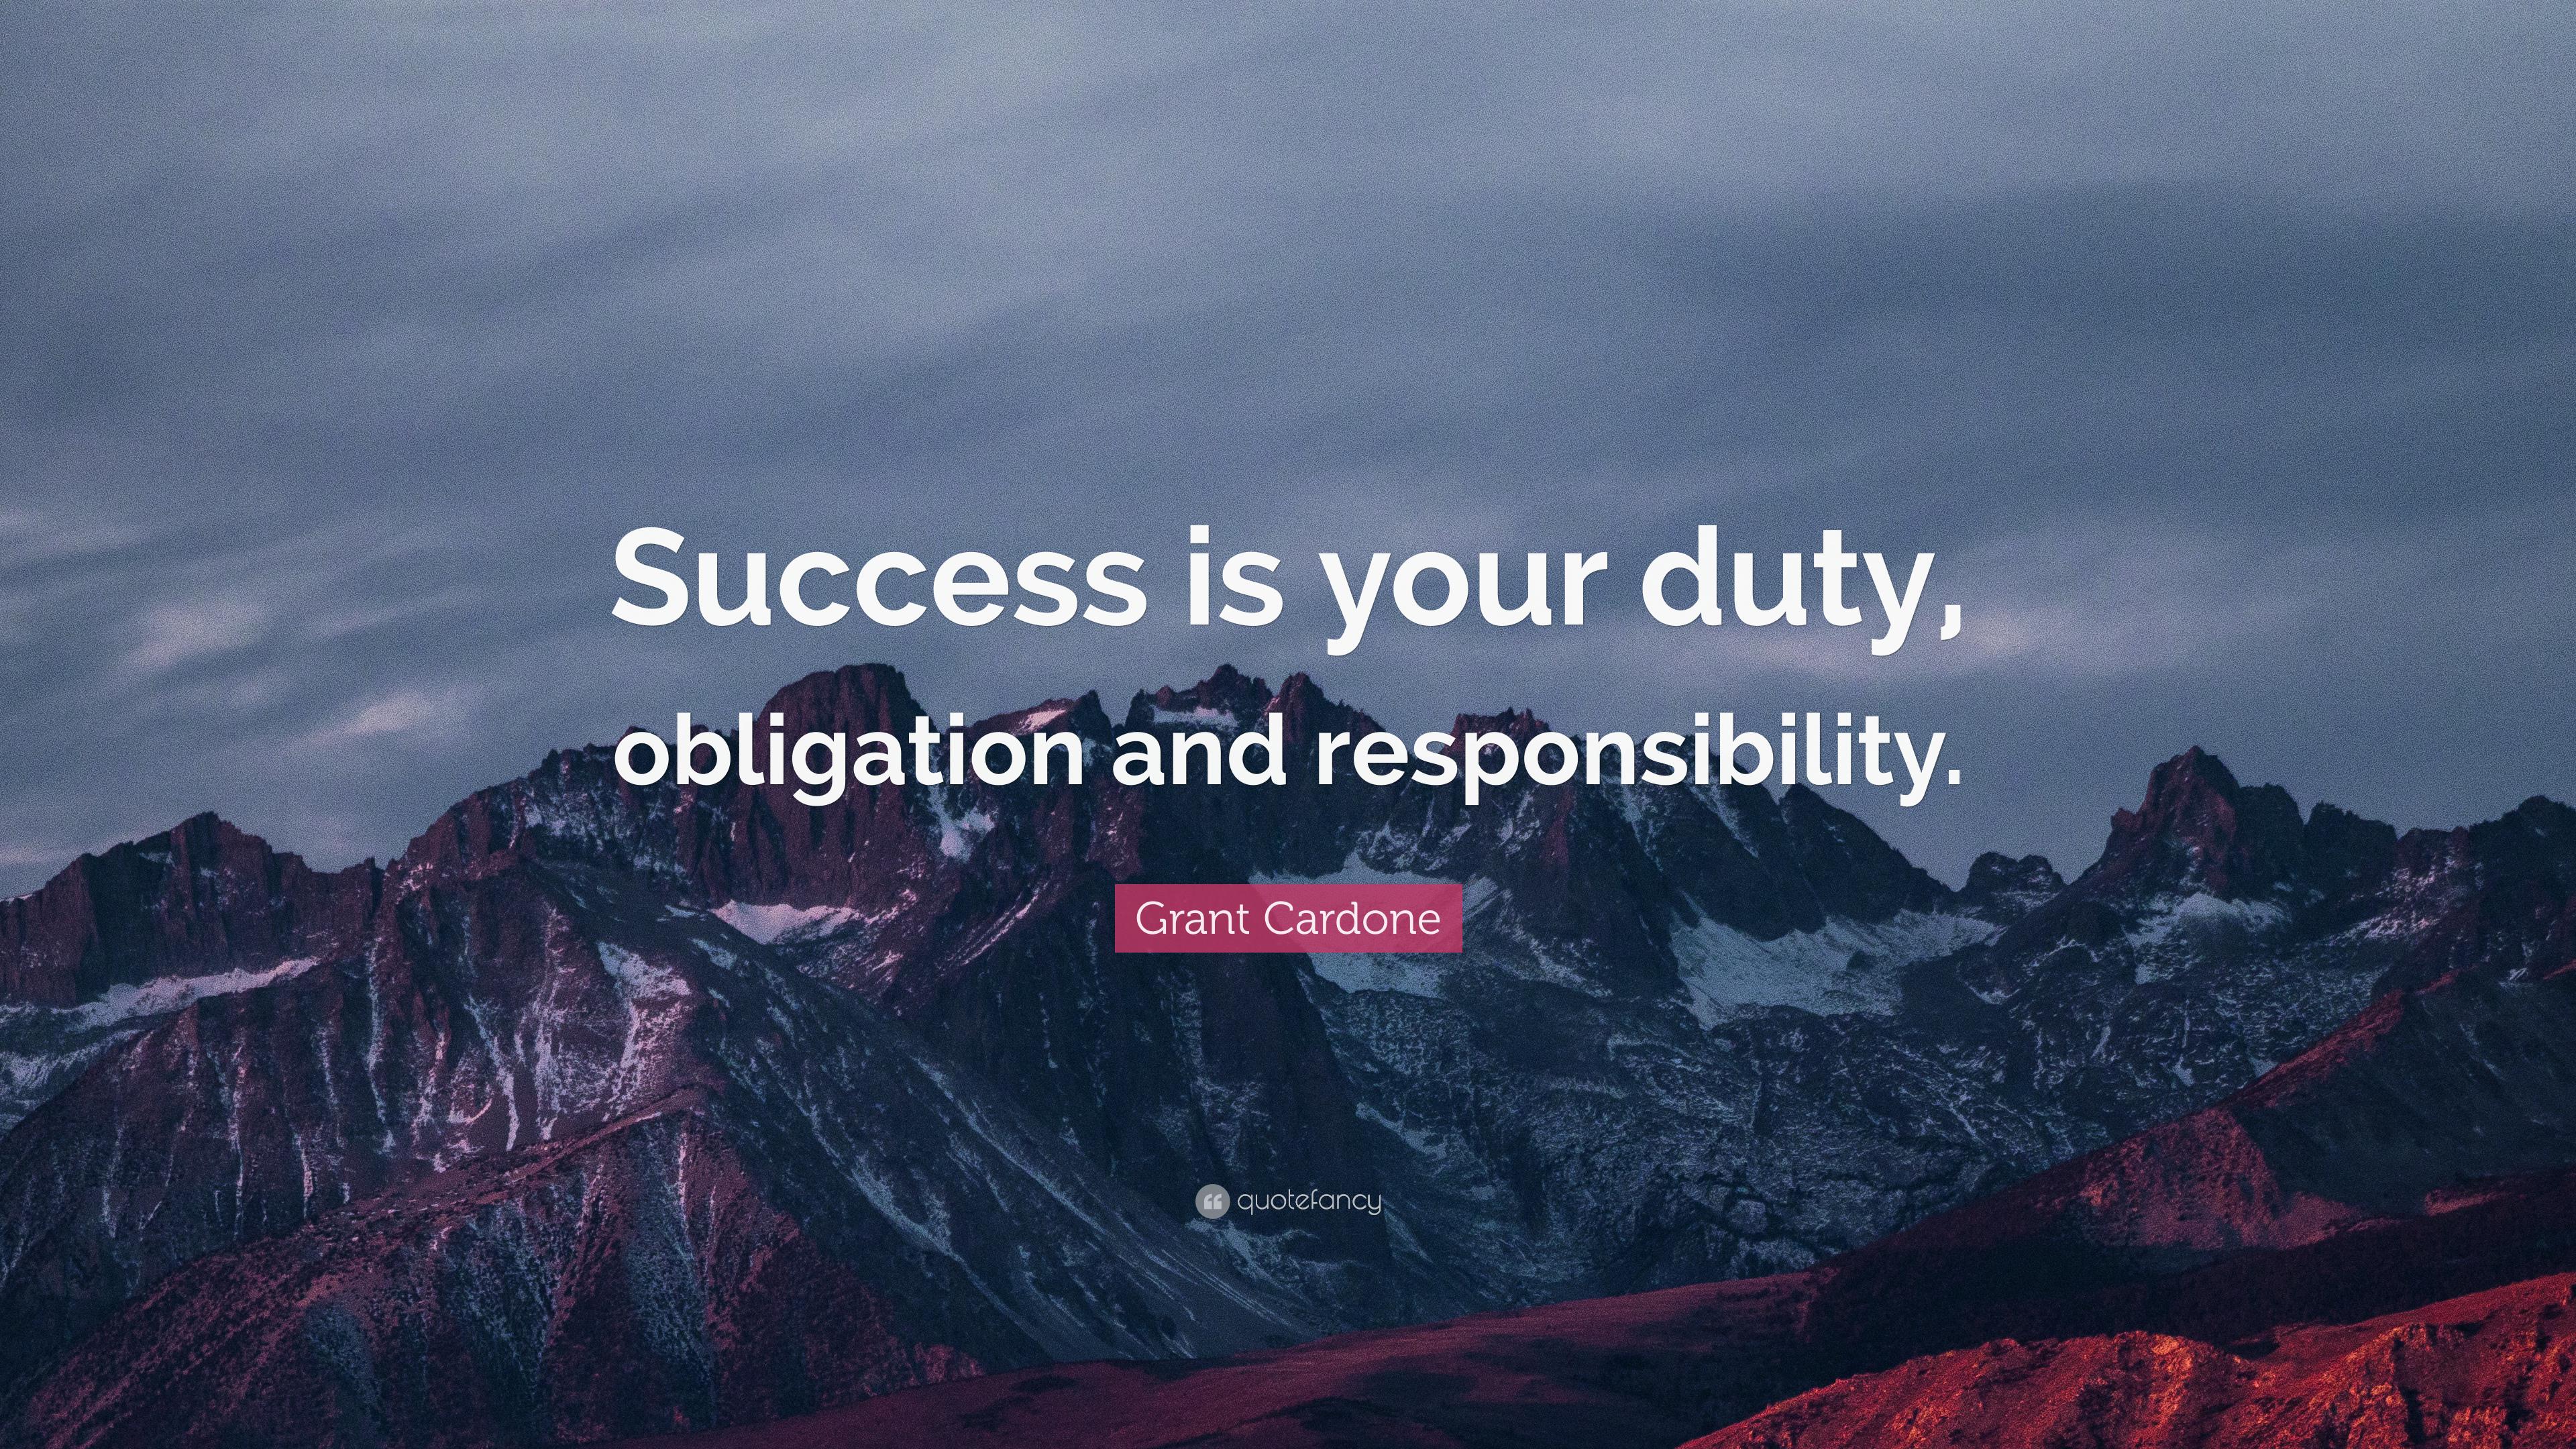 Grant Cardone Quote: “Success is your duty, obligation